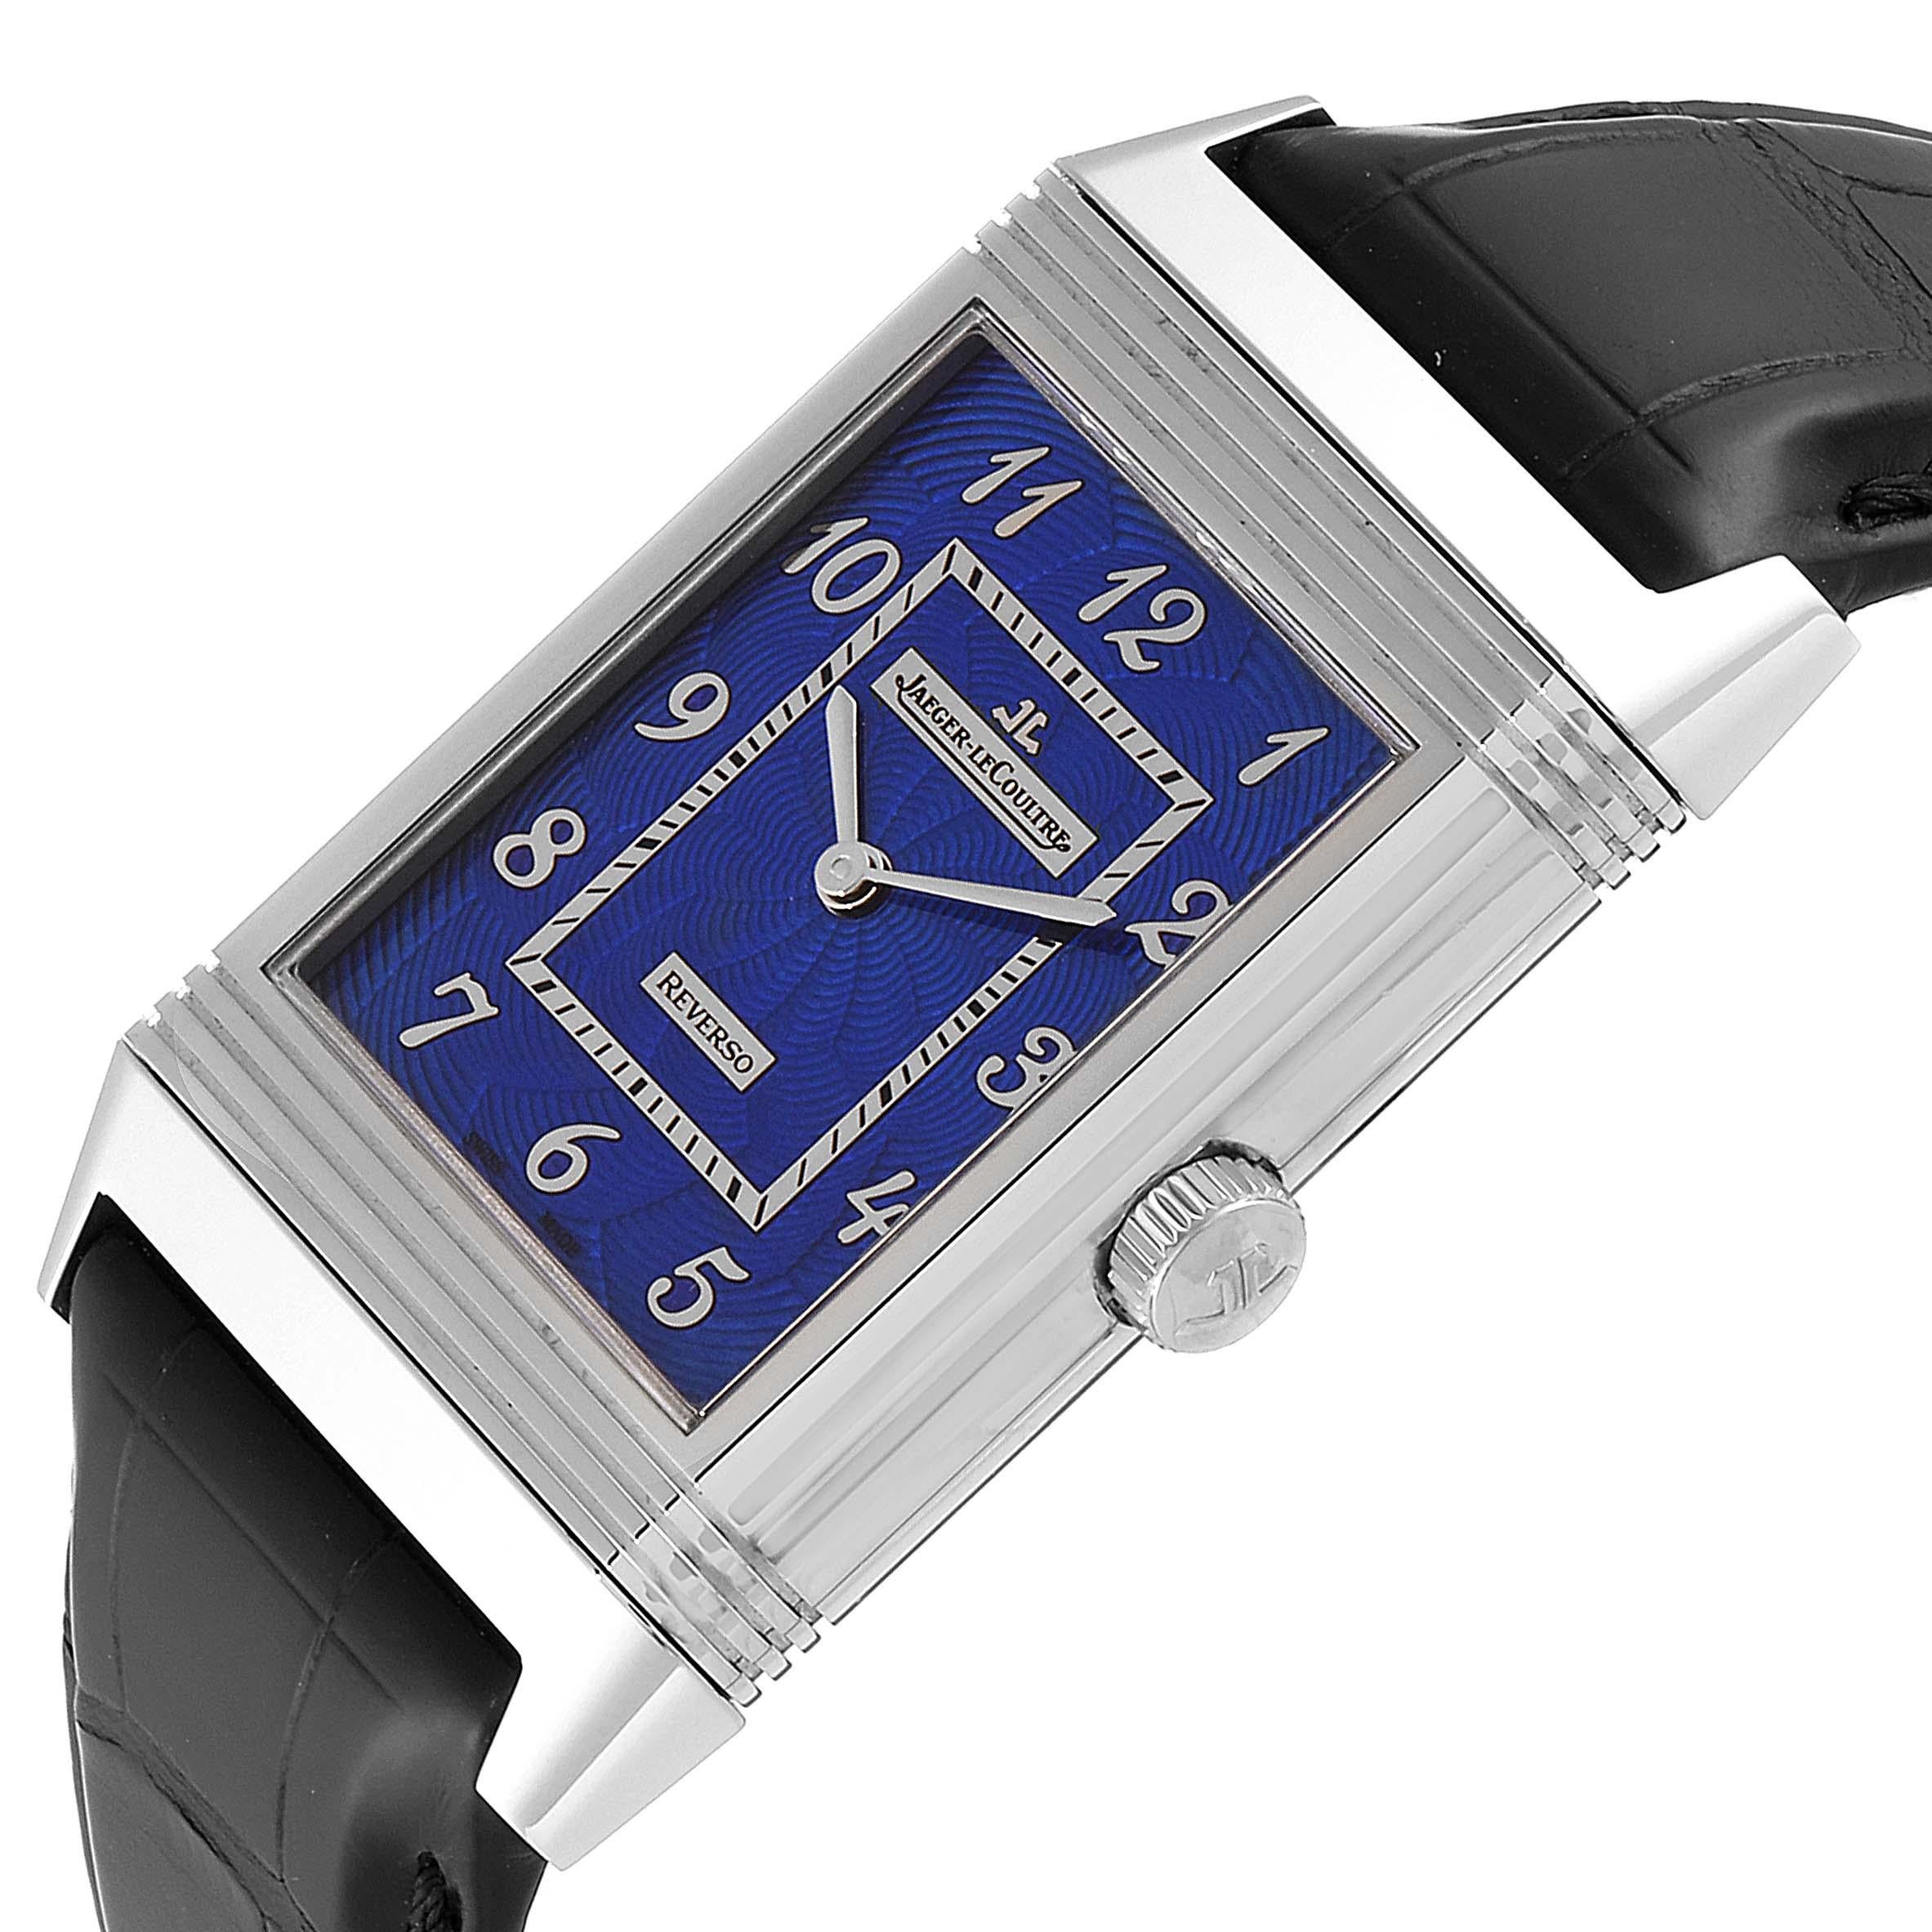 Men's Jaeger-LeCoultre Grande Reverso White Gold Limited Watch 273.3.62 Box Card